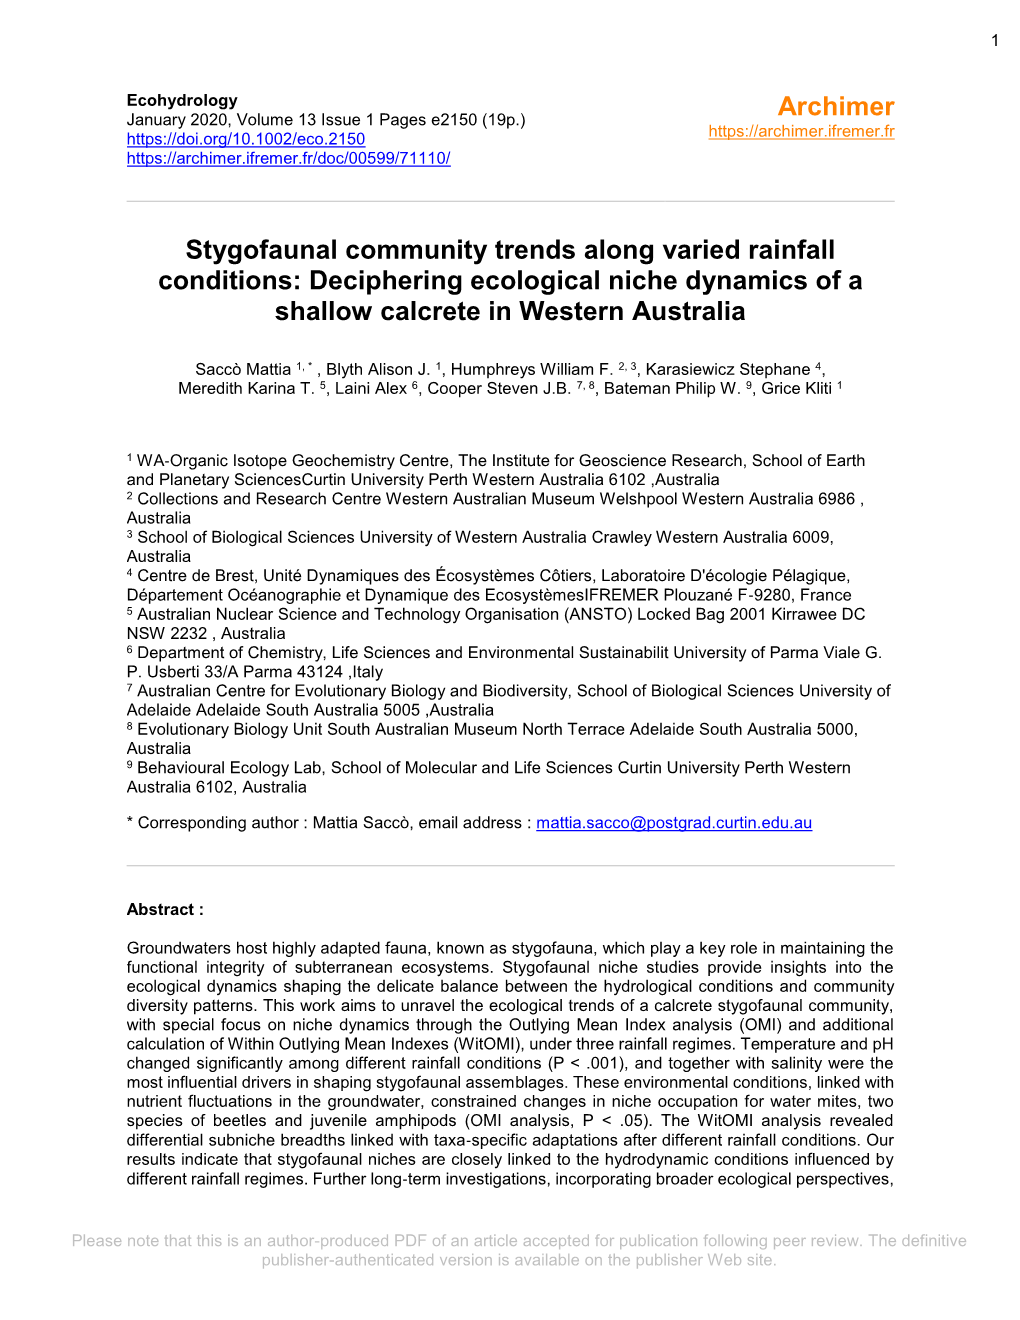 Stygofaunal Community Trends Along Varied Rainfall Conditions: Deciphering Ecological Niche Dynamics of a Shallow Calcrete in Western Australia